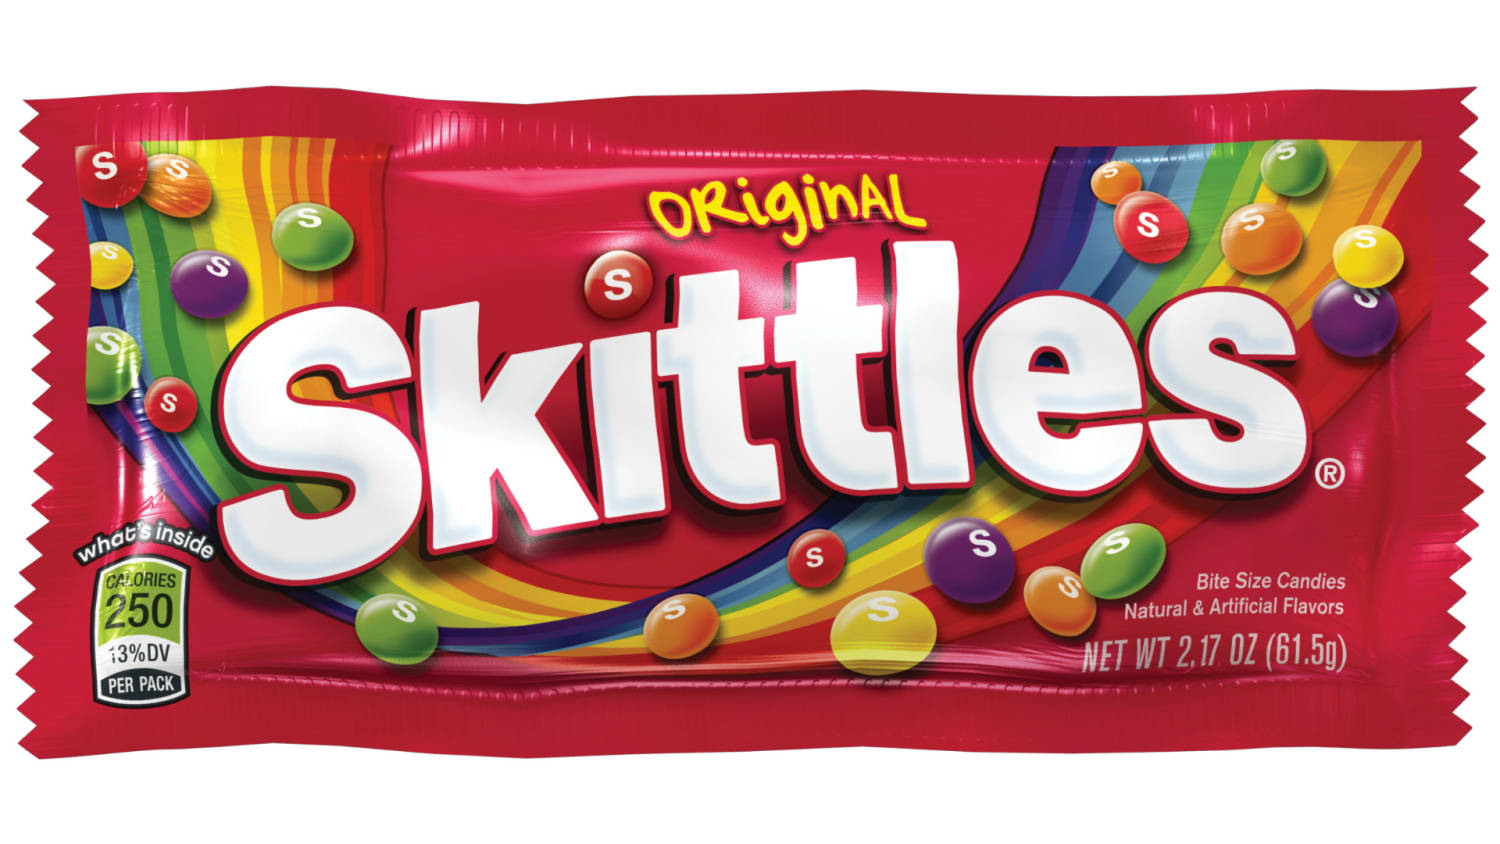 Skittles myth: Are red, yellow, and green all the same flavor?